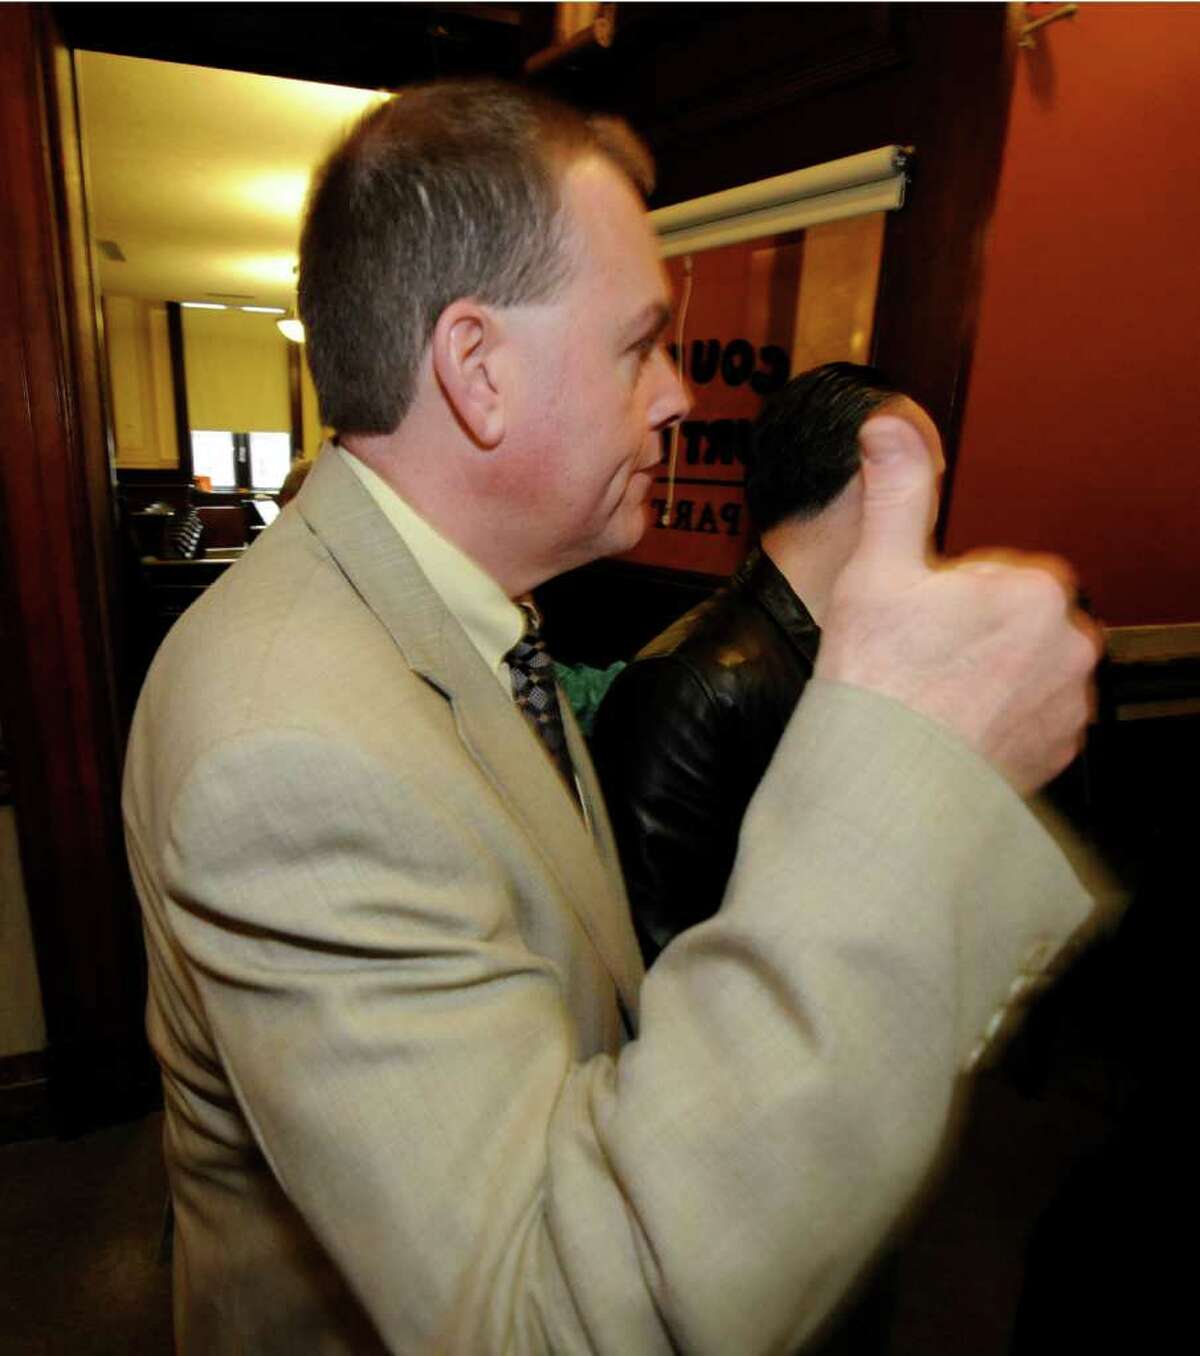 Edward McDonough gives the "thumbs up" sign as he leaves the courtroom after a hung jury caused Judge George Pulver to declare a mistrial in ballot fraud case in which he was a defendant in Troy, N.Y. March 13, 2012.